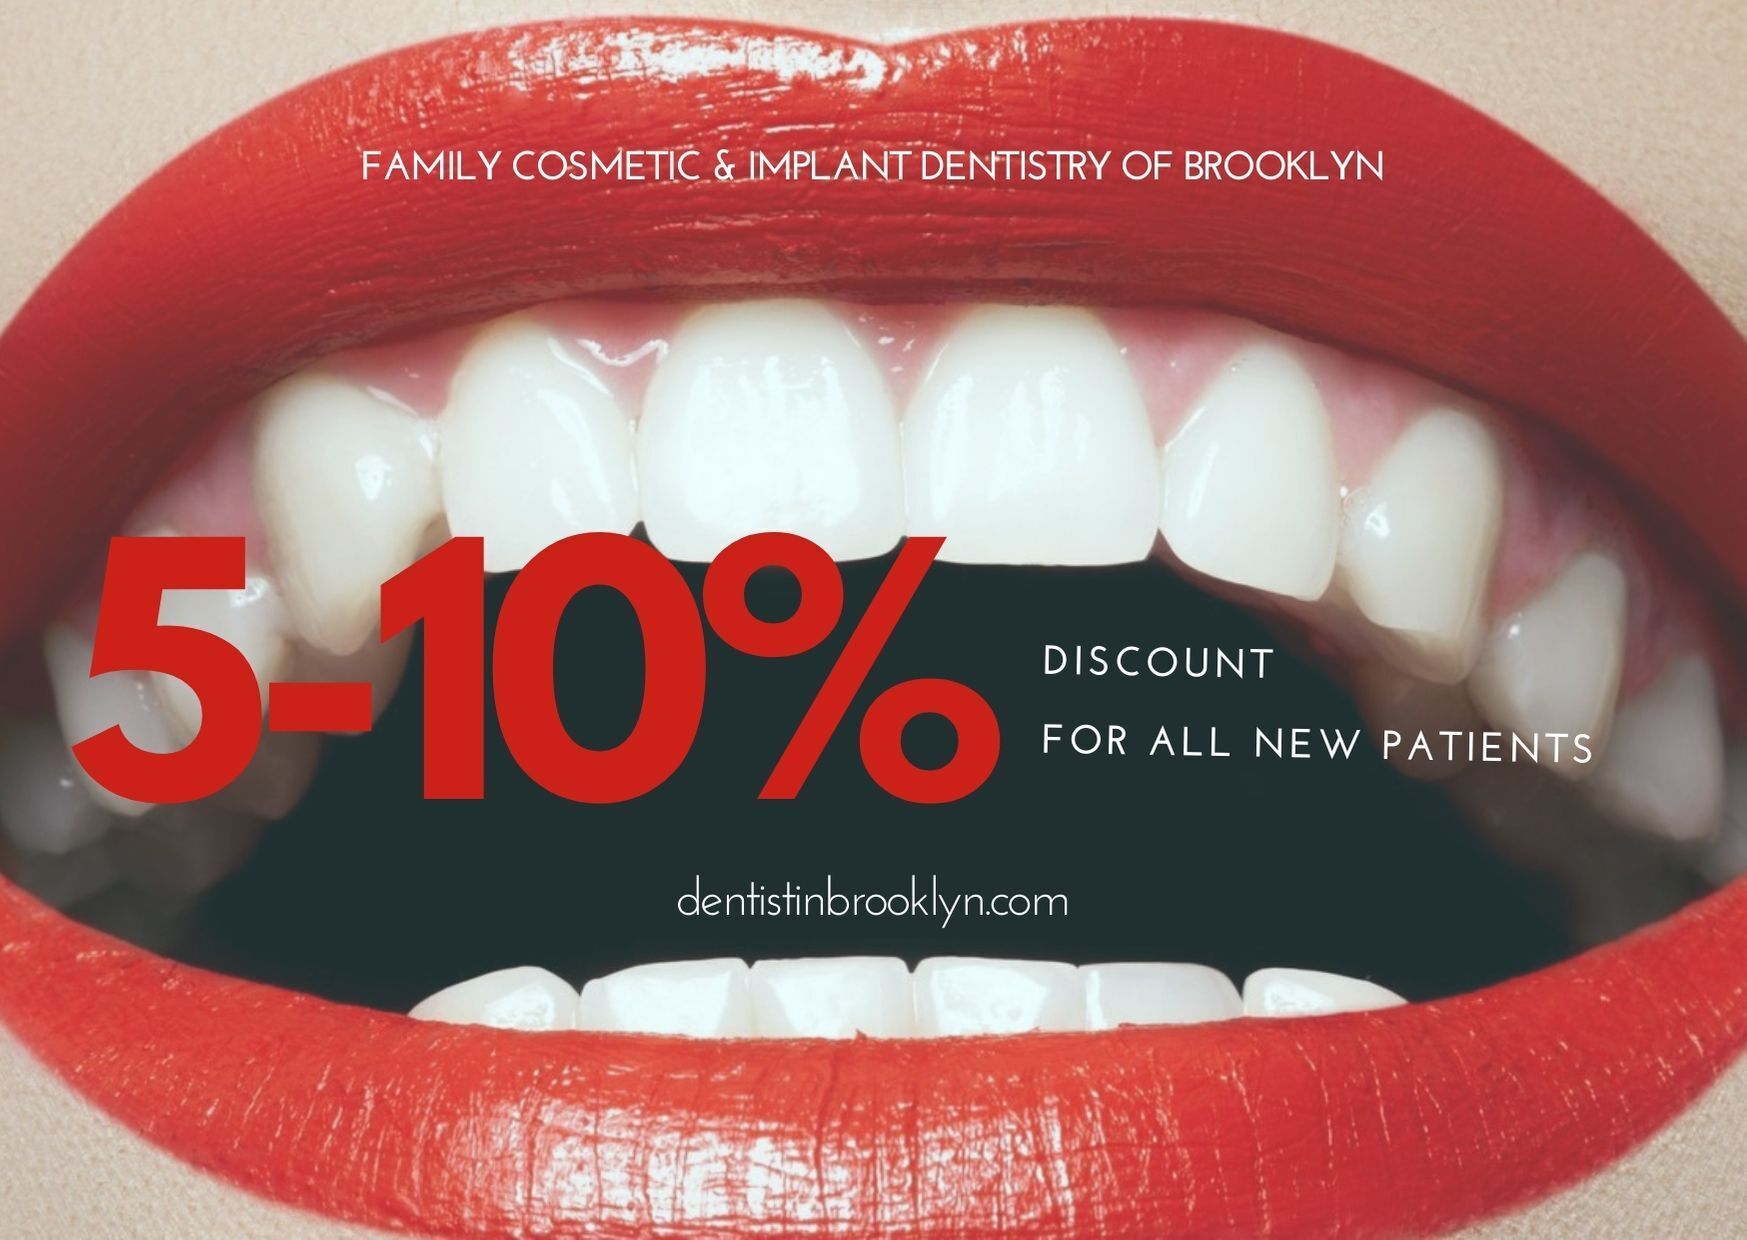 Family Cosmetic & Implant Dentistry of Brooklyn | 2148 Ocean Ave #401, Brooklyn, NY 11229, United States | Phone: (718) 339-8852